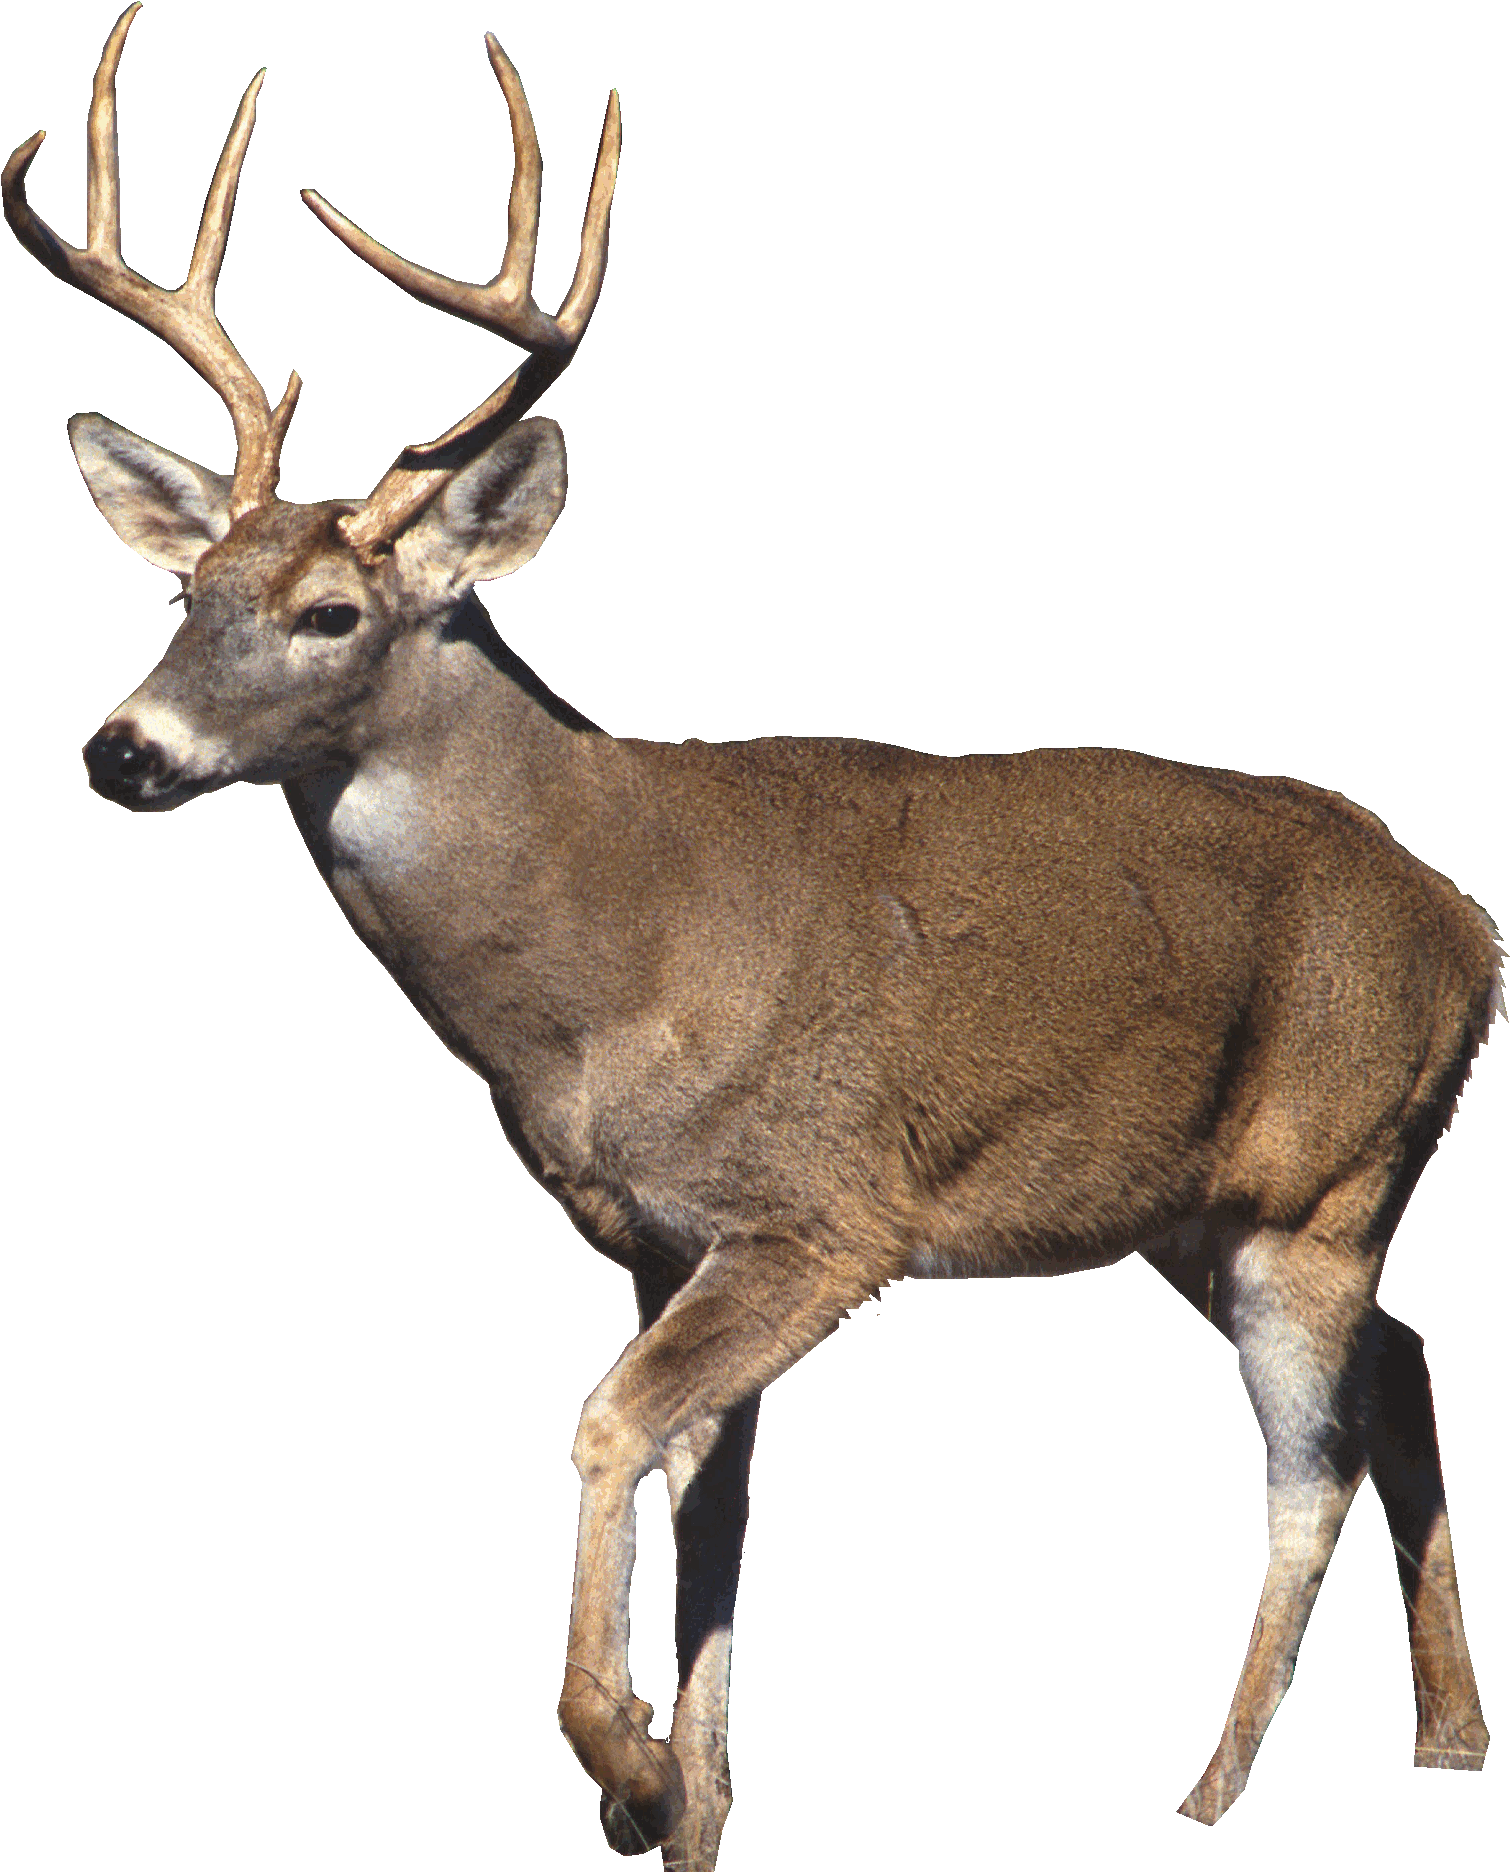 File:White-tailed deer.gif - Wikimedia Commons